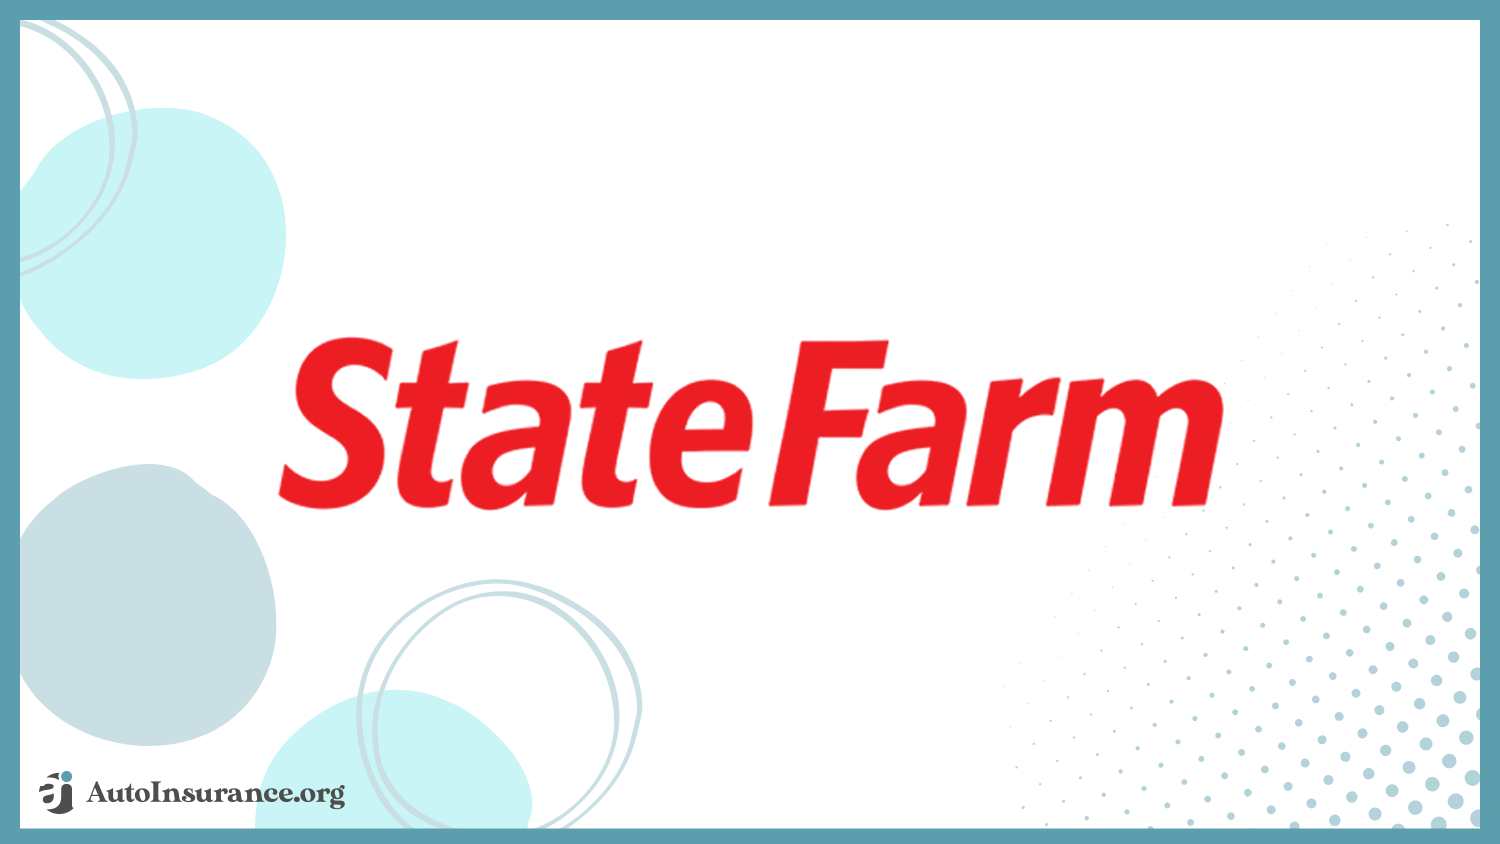 State Farm: Best Auto Insurance for Hybrid Vehicles